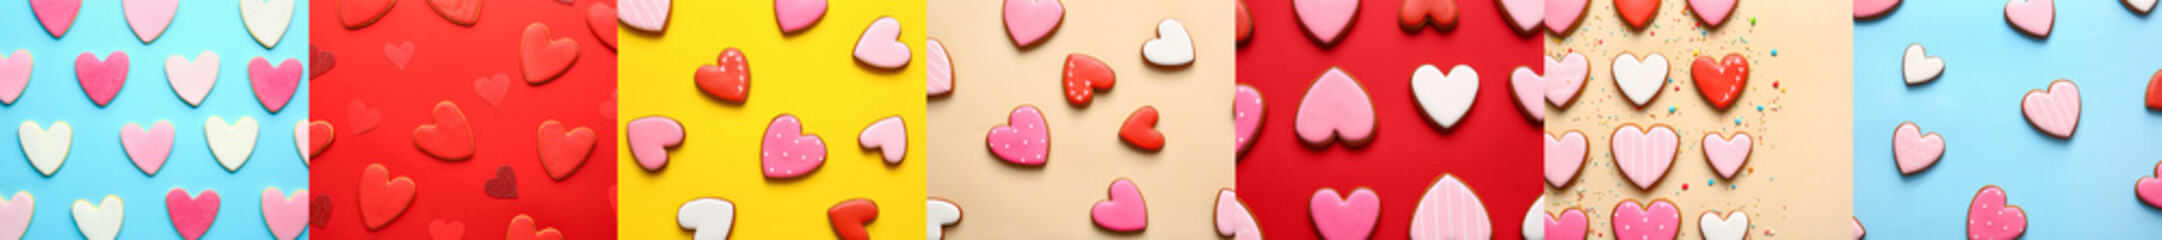 Collage with many heart-shaped cookies for Valentine's Day on colorful background